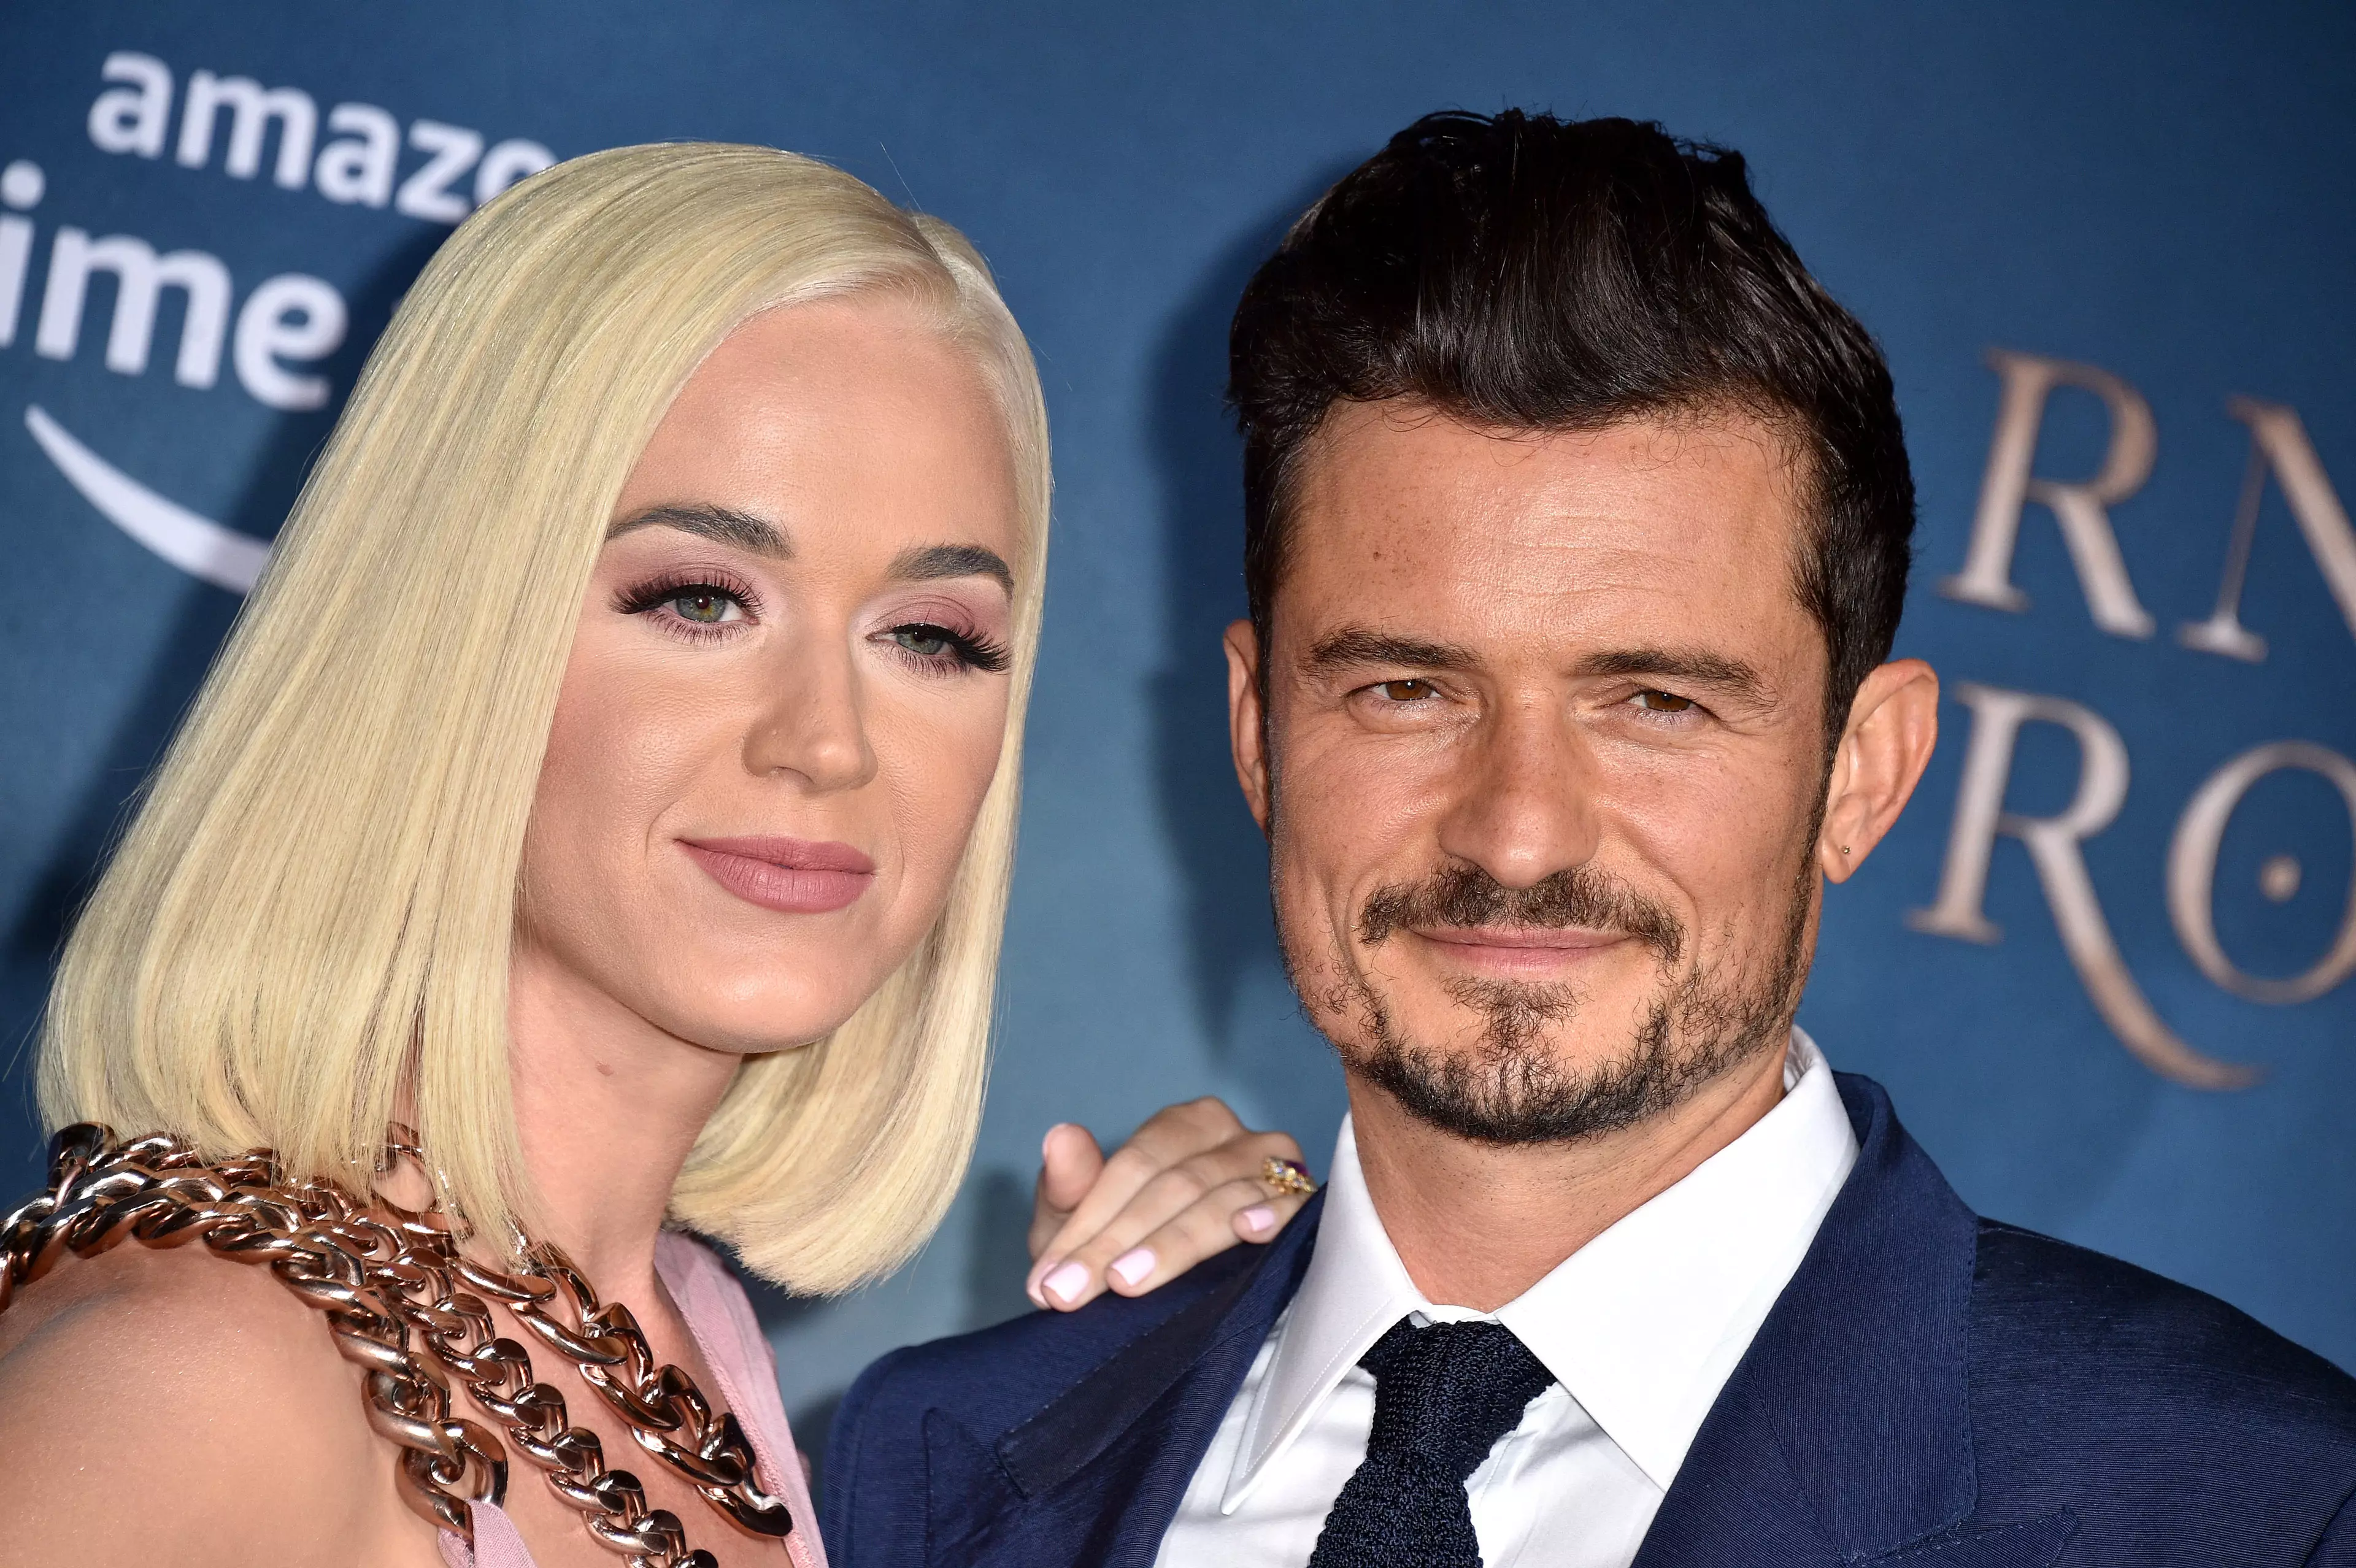 Katy and Orlando have been engaged since 2019.